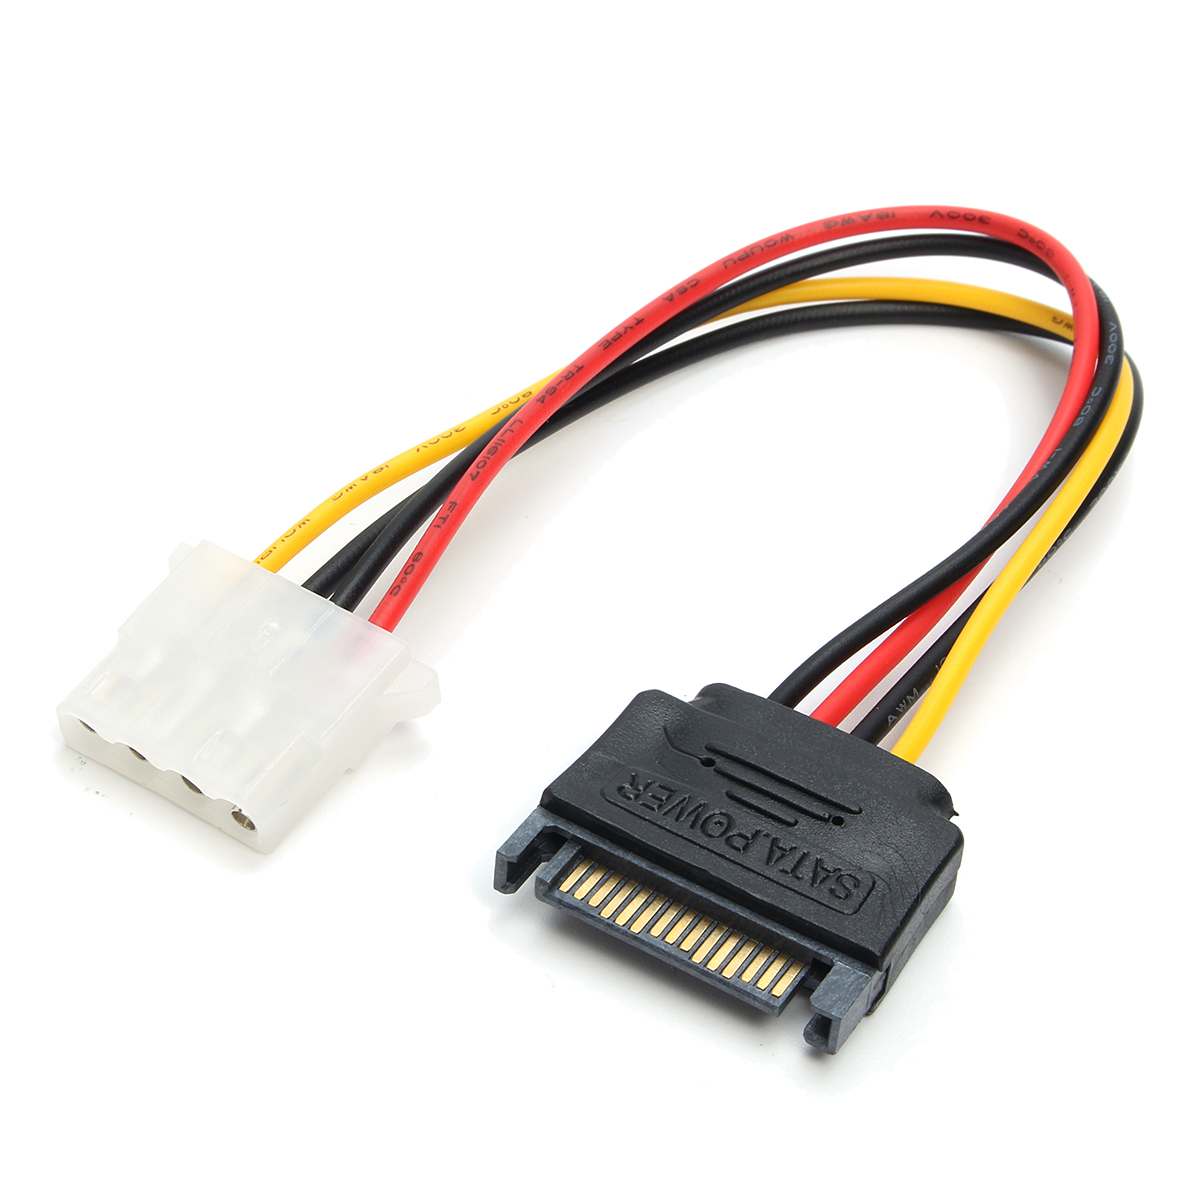 Find USB 3 0 PCI E 1X to 16X Graphics Card Extension Cable SATA 15Pin to 4Pin Power Cable for Sale on Gipsybee.com with cryptocurrencies